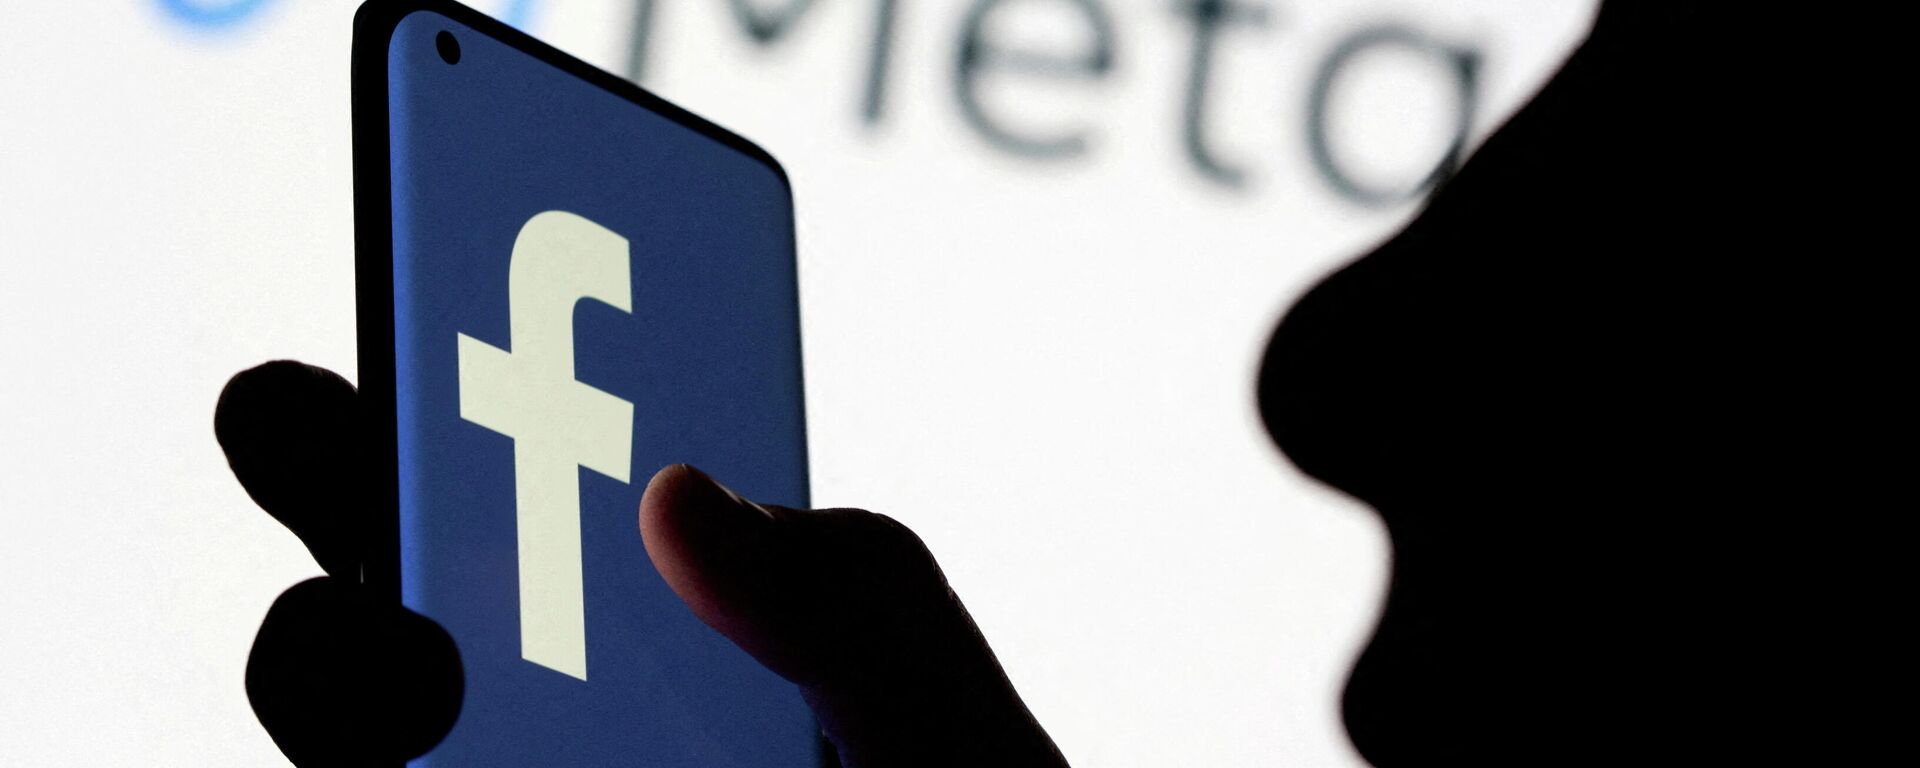 A woman holds smartphone with Facebook logo in front of a displayed Facebook's new rebrand logo Meta in this illustration picture taken October 28, 2021 - Sputnik International, 1920, 03.02.2022